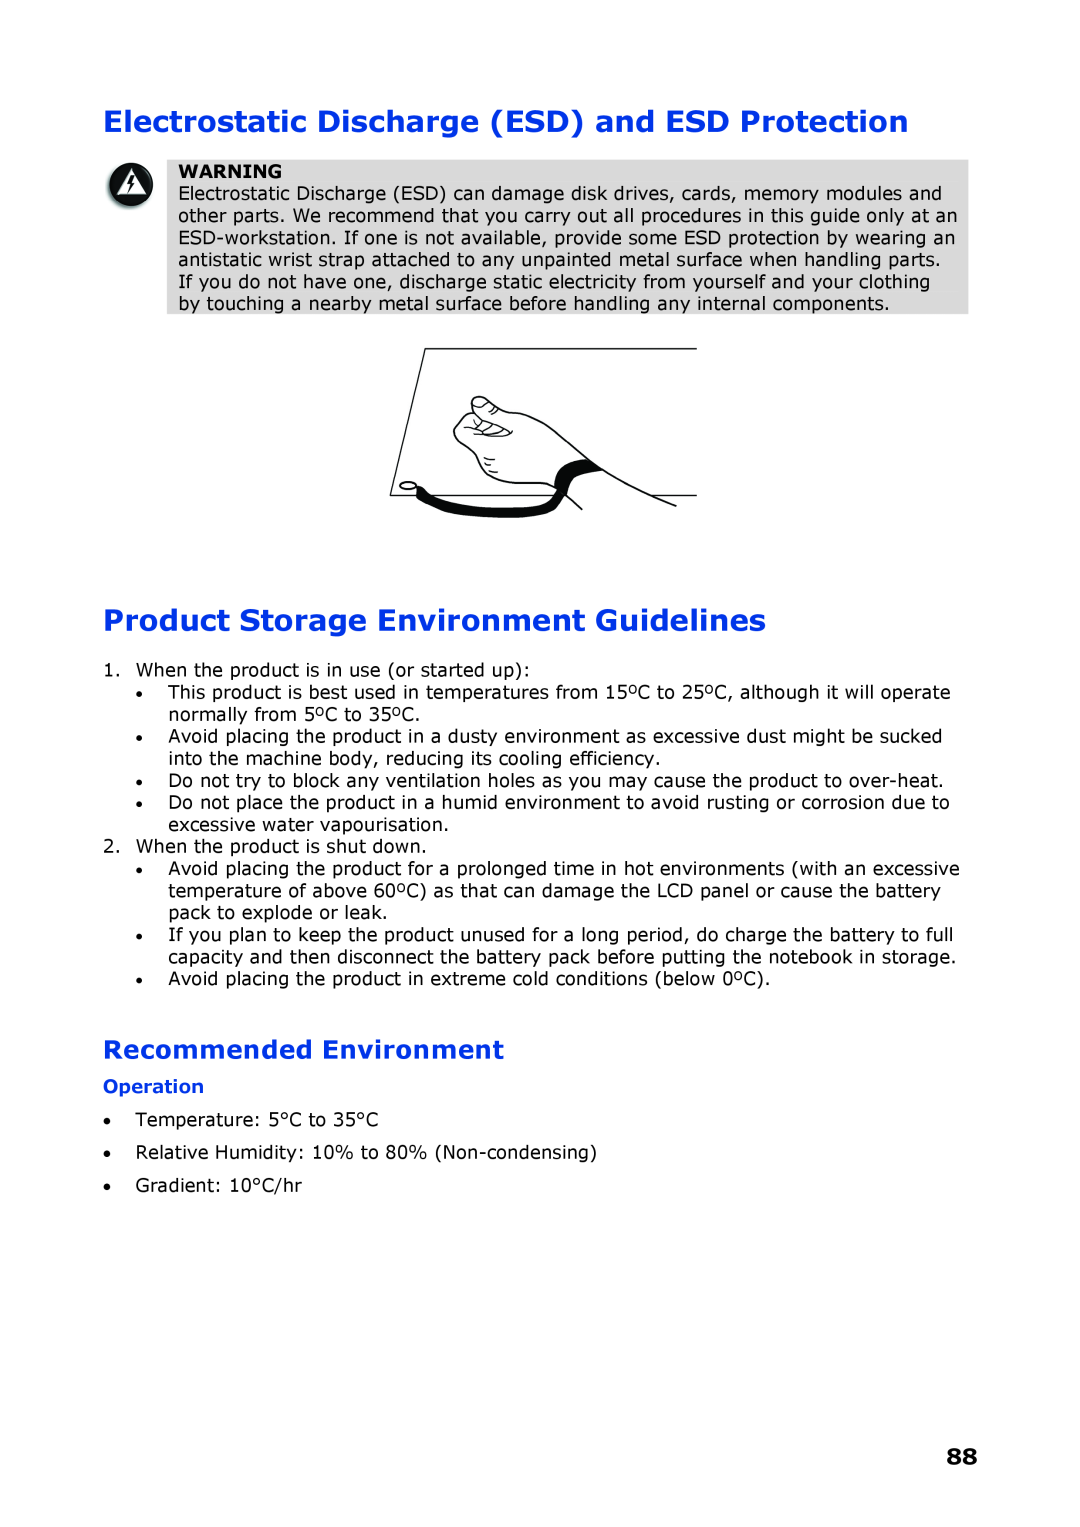 NEC P8510 Electrostatic Discharge ESD and ESD Protection, Product Storage Environment Guidelines, Recommended Environment 